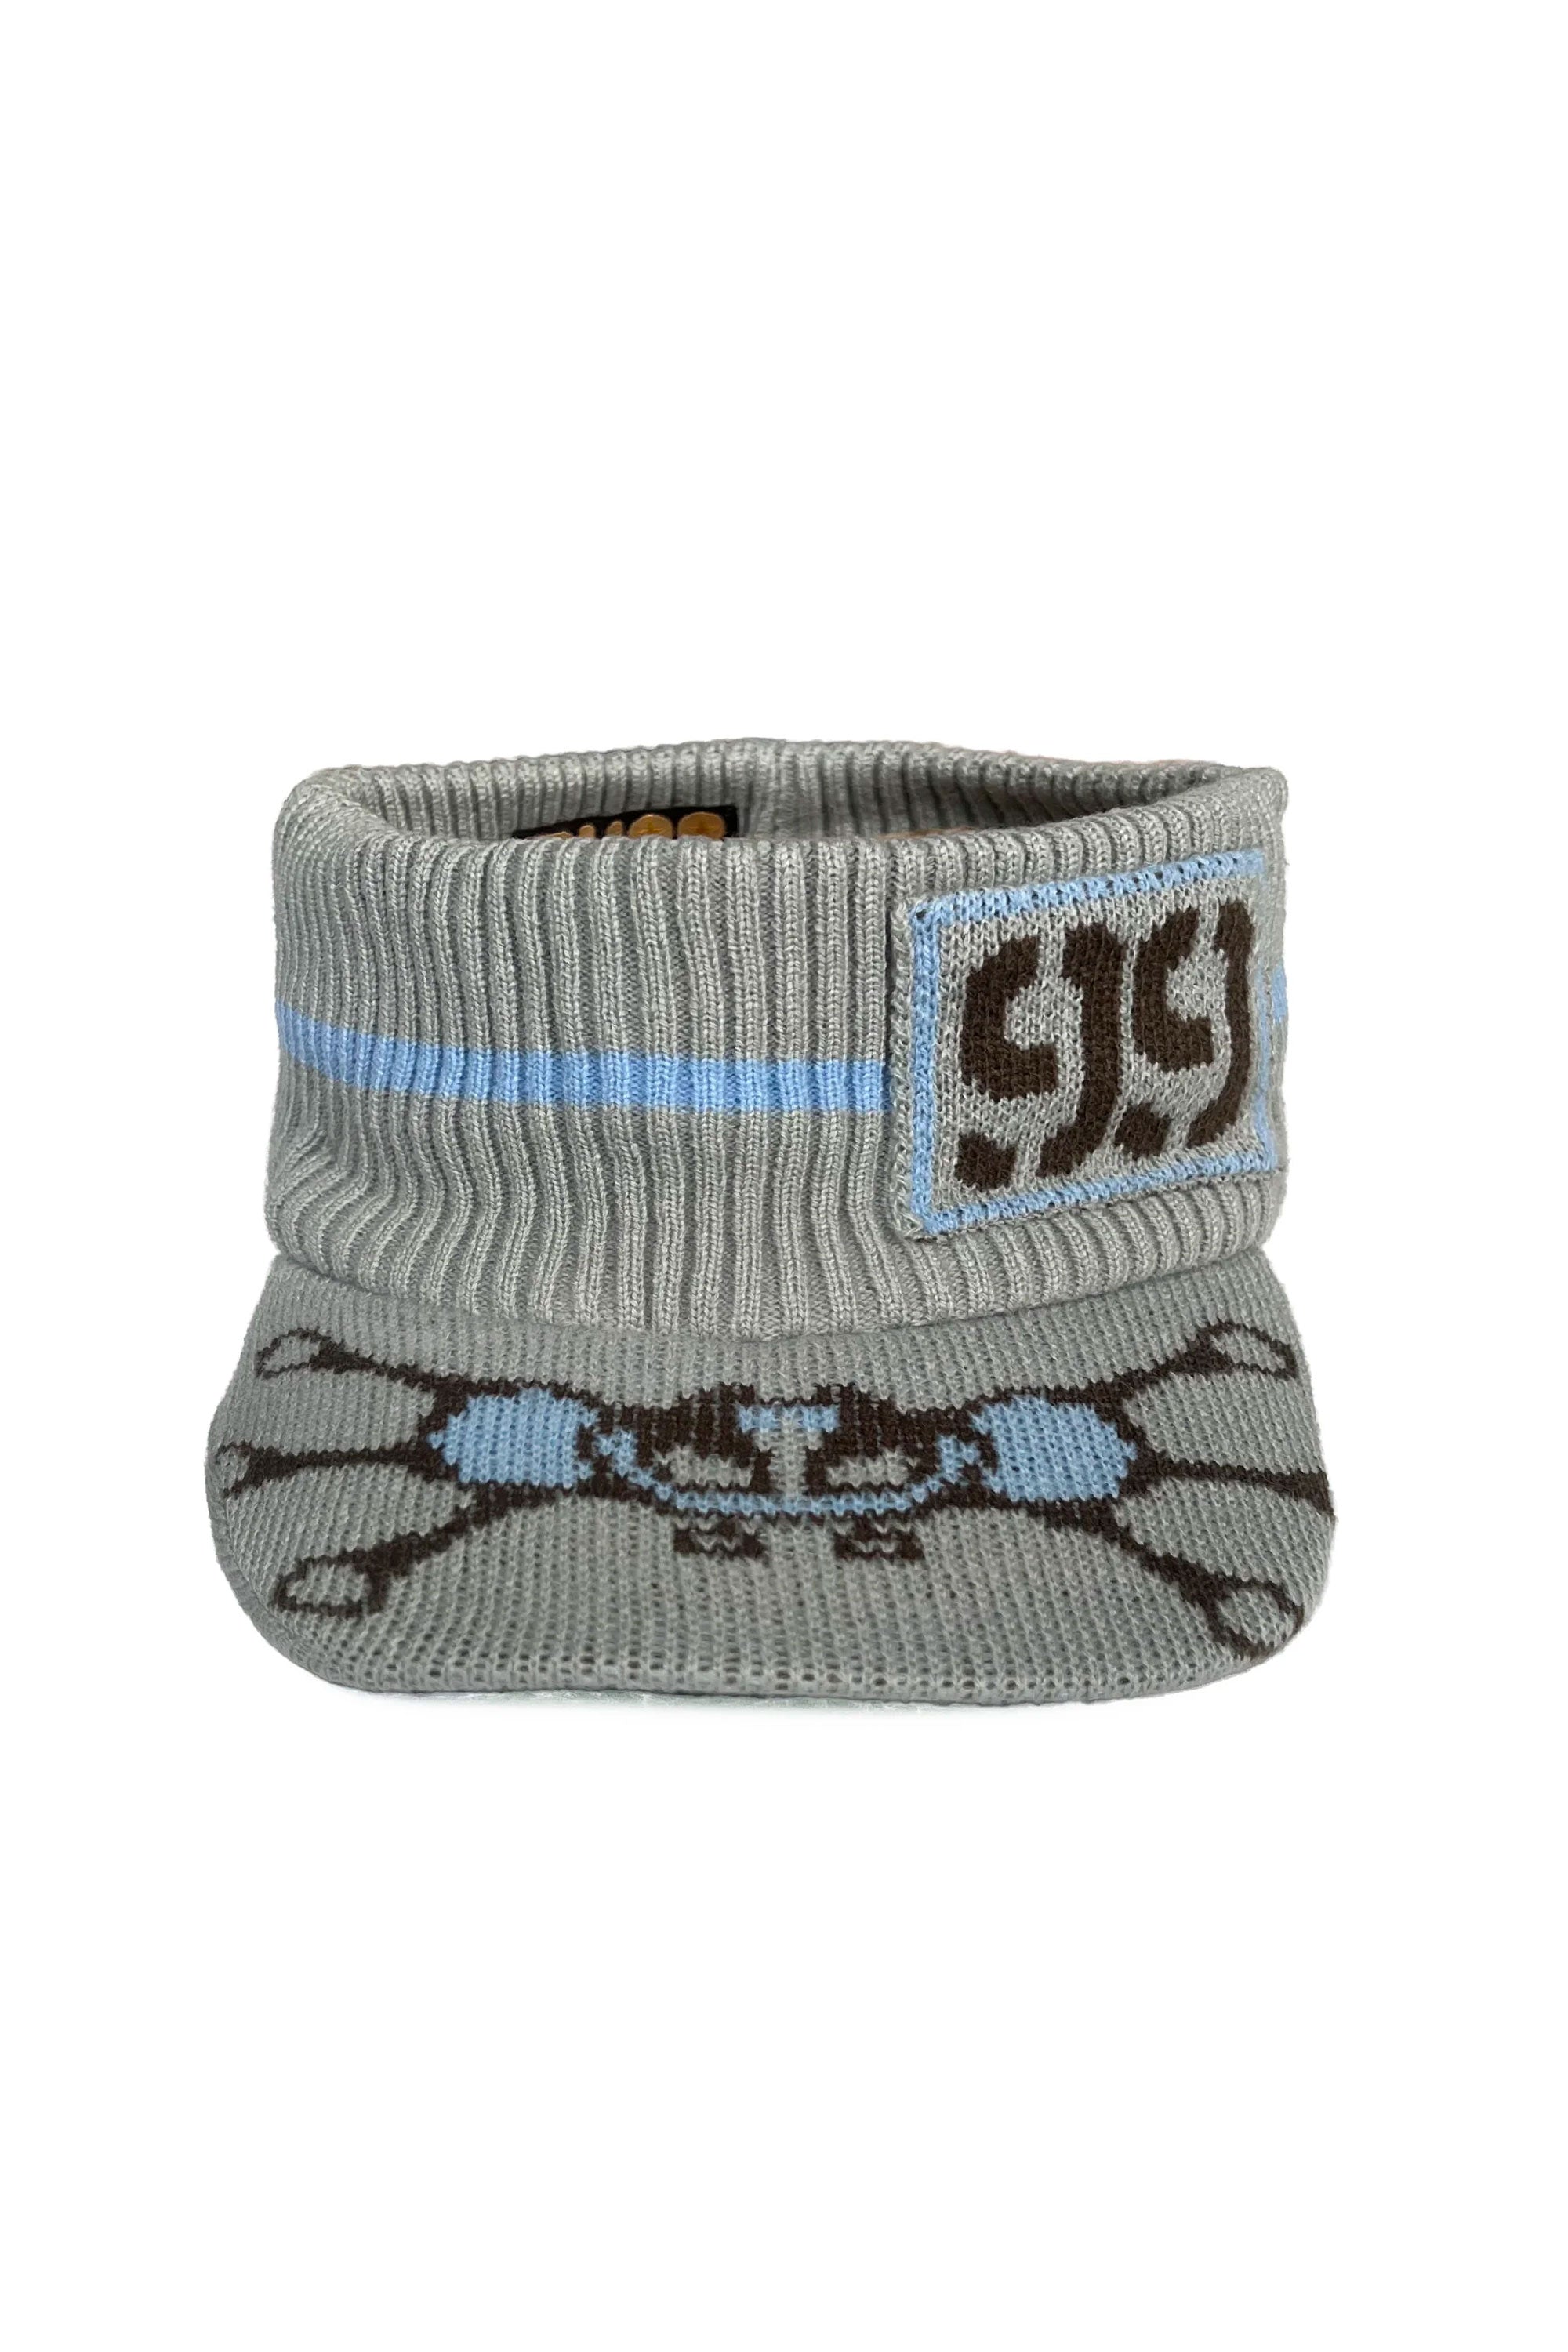 The HAPPY 99 - KNIT VISOR  available online with global shipping, and in PAM Stores Melbourne and Sydney.